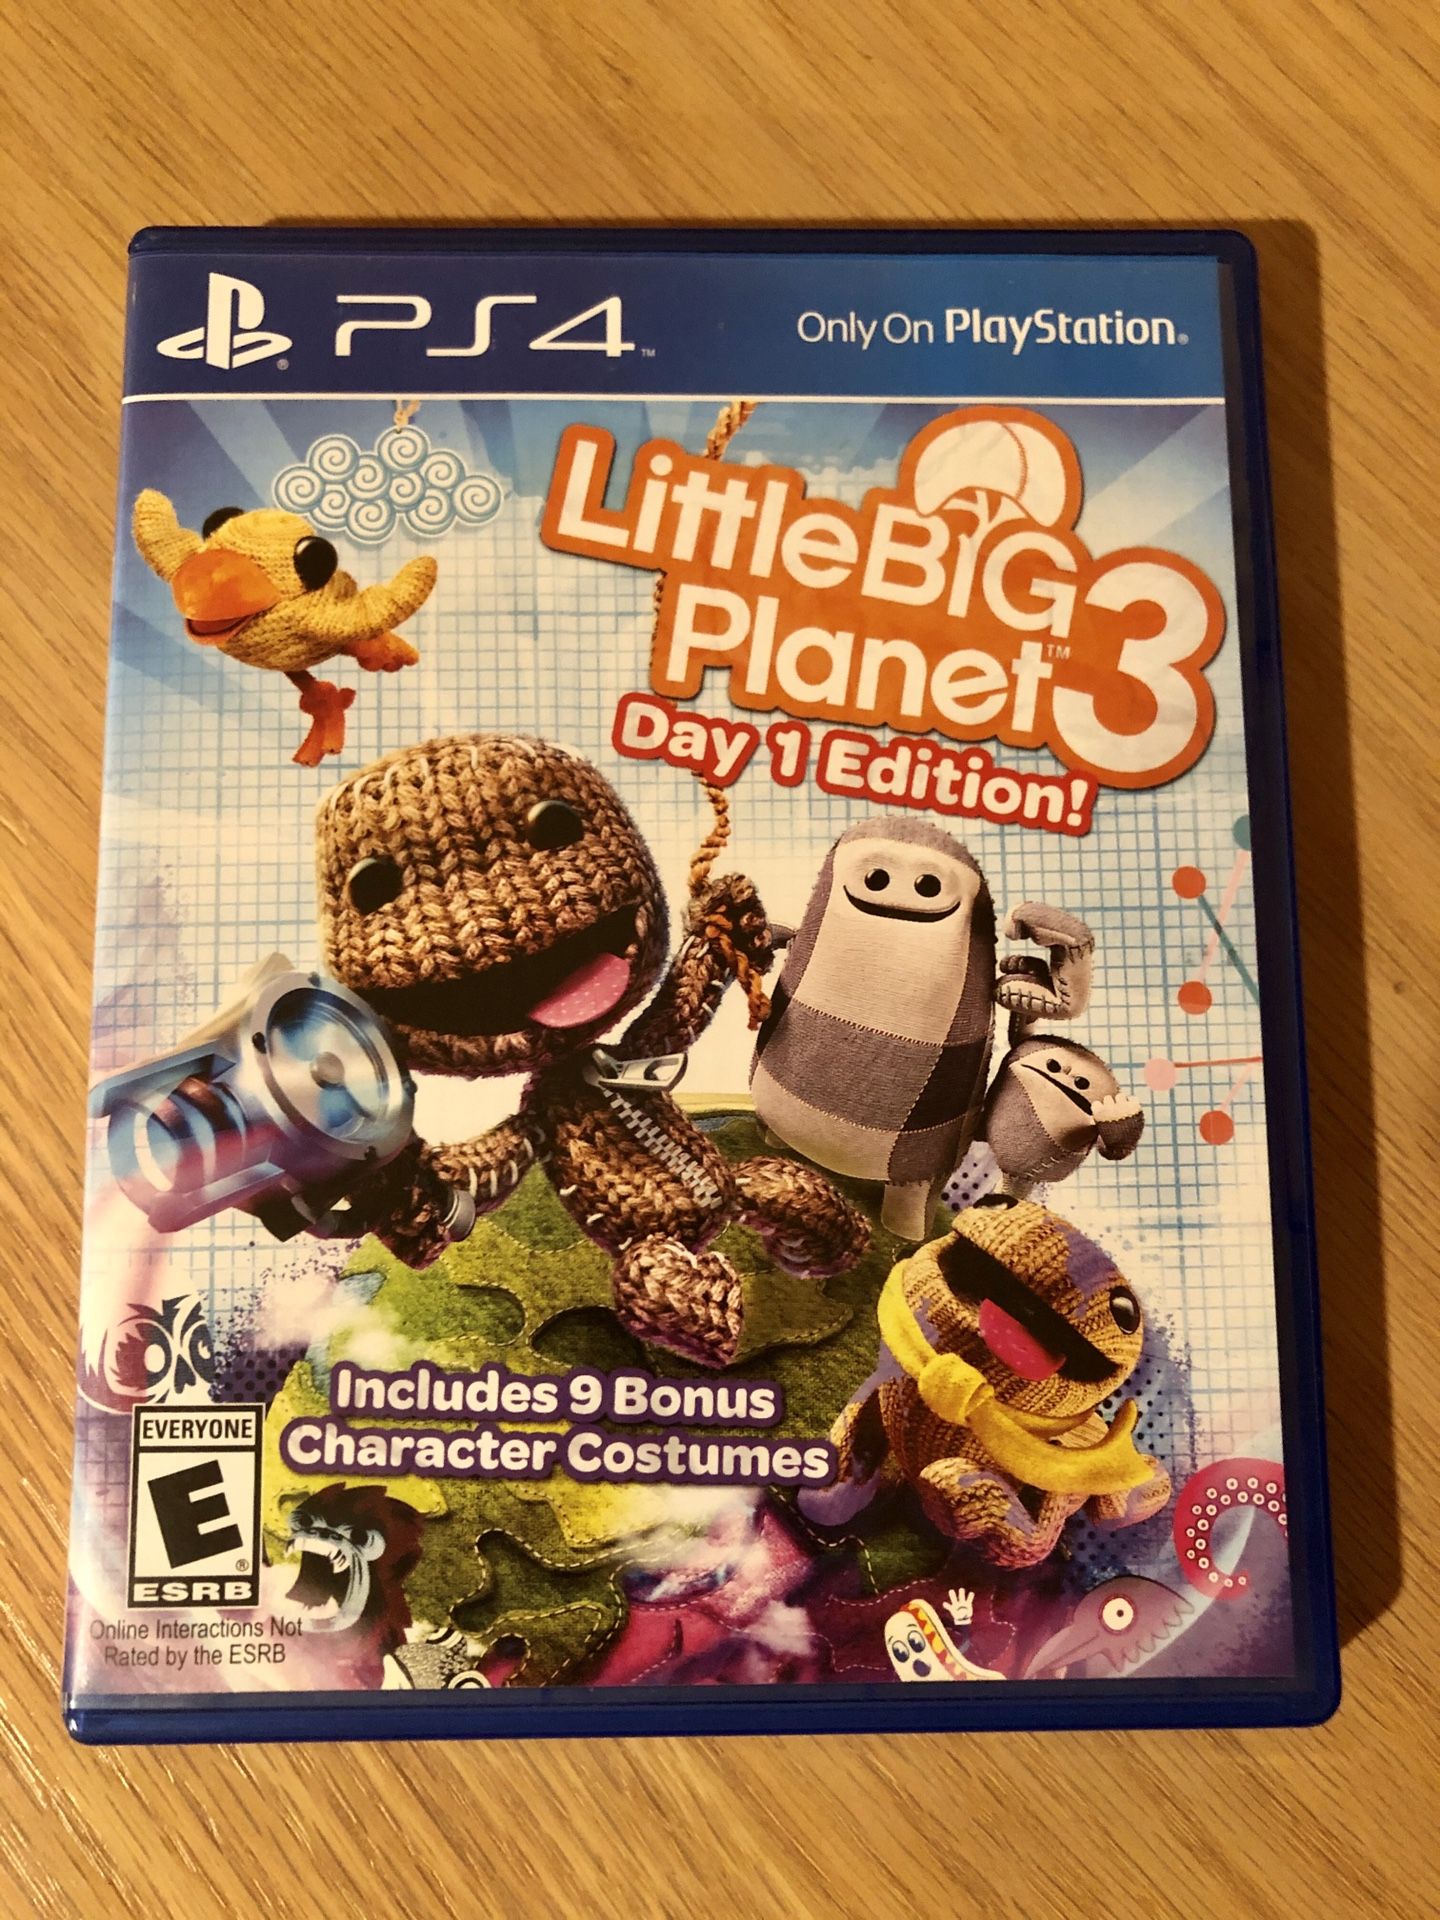 Little Big Planet 3 for PS4